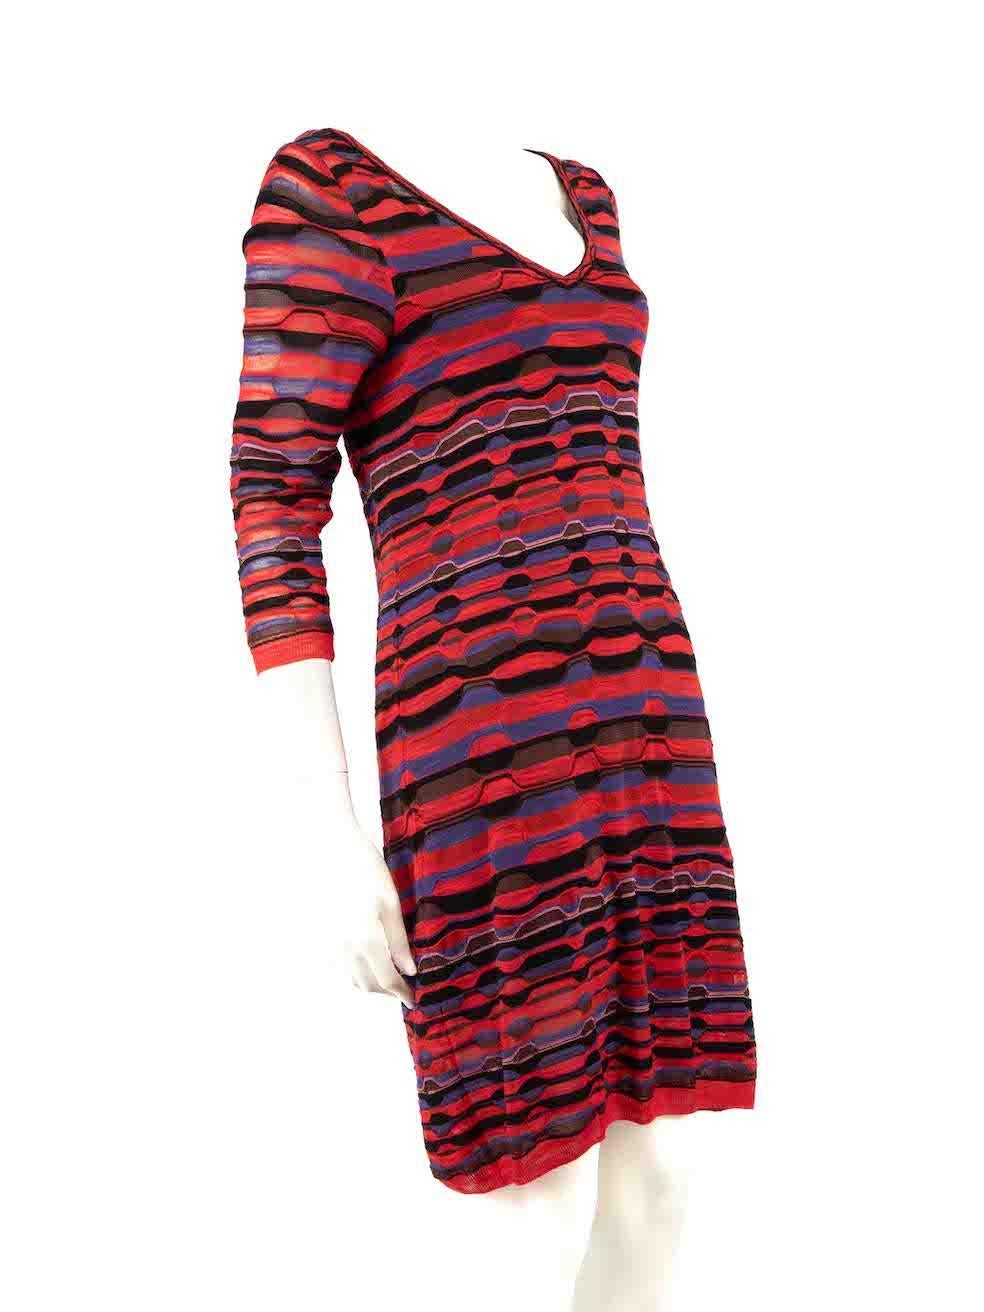 CONDITION is Very good. Hardly any visible wear to dress is evident on this used M Missoni designer resale item.
 
 
 
 Details
 
 
 Multicolour- red, purple, black
 
 Synthetic
 
 Knit dress
 
 Striped pattern
 
 Midi
 
 V-neck
 
 Long sleeves
 
 
